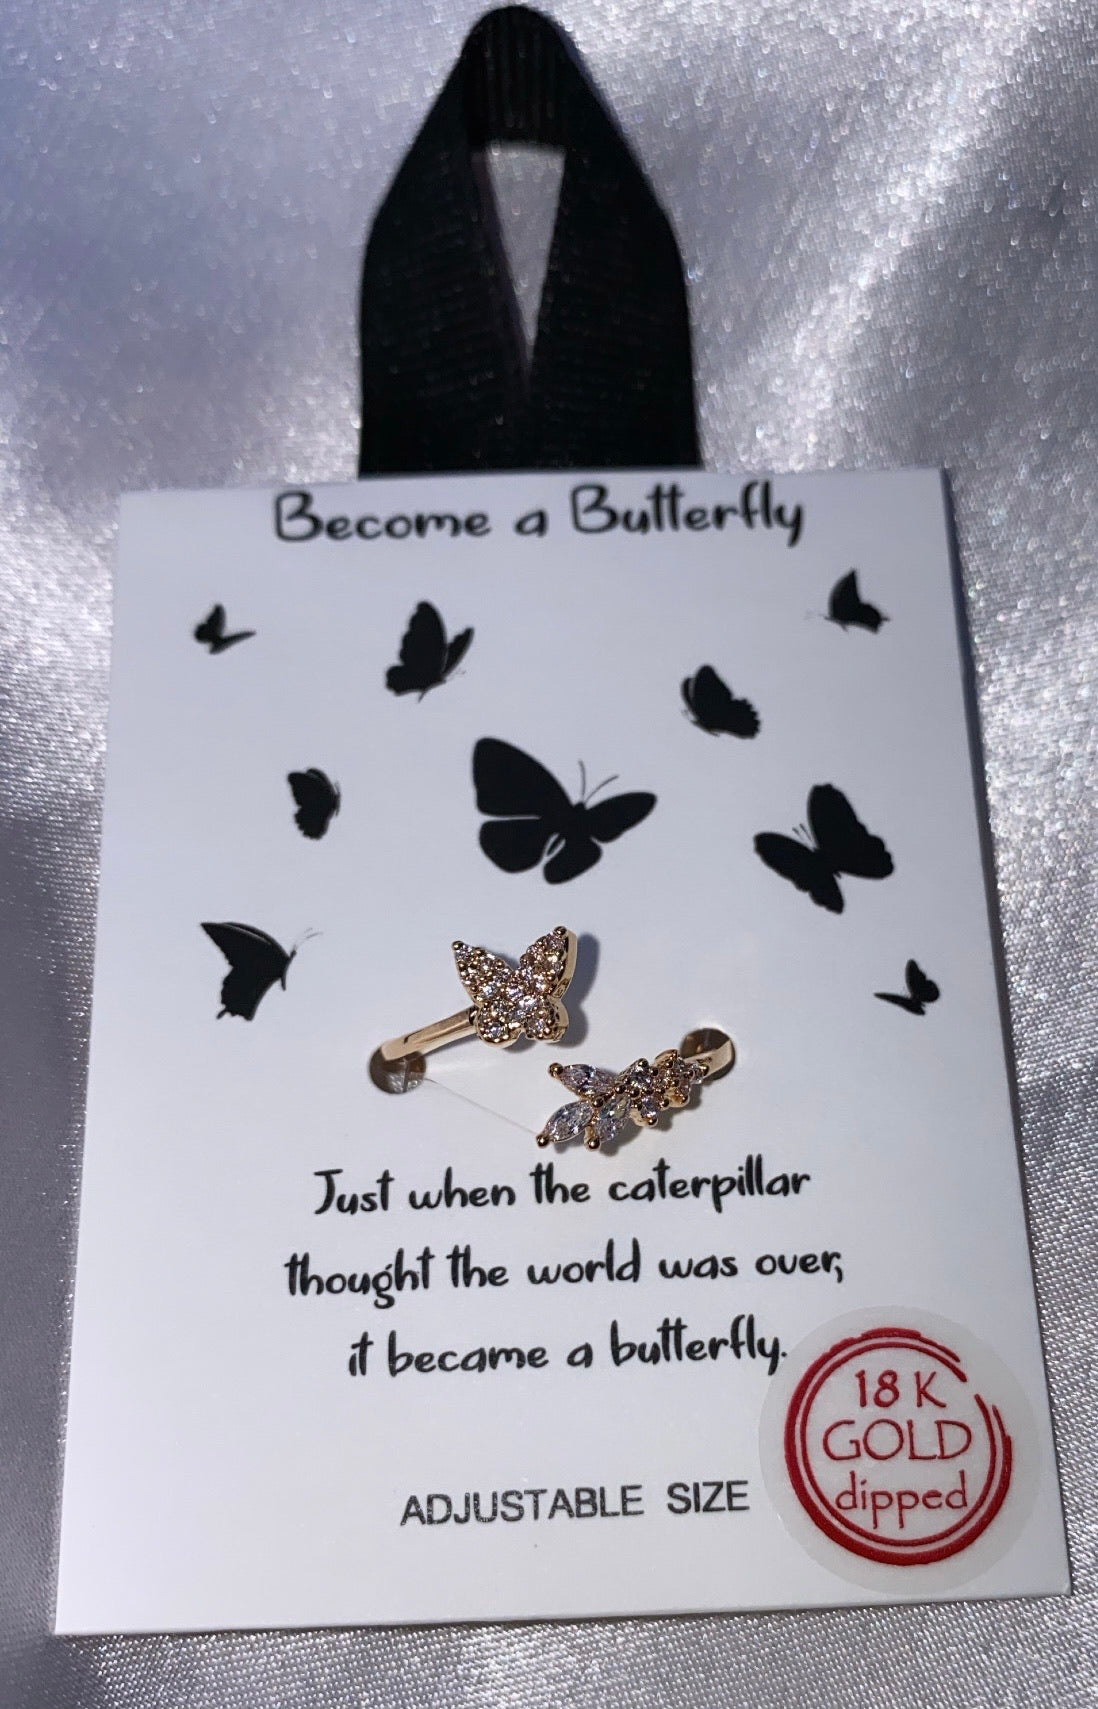 Become a butterfly